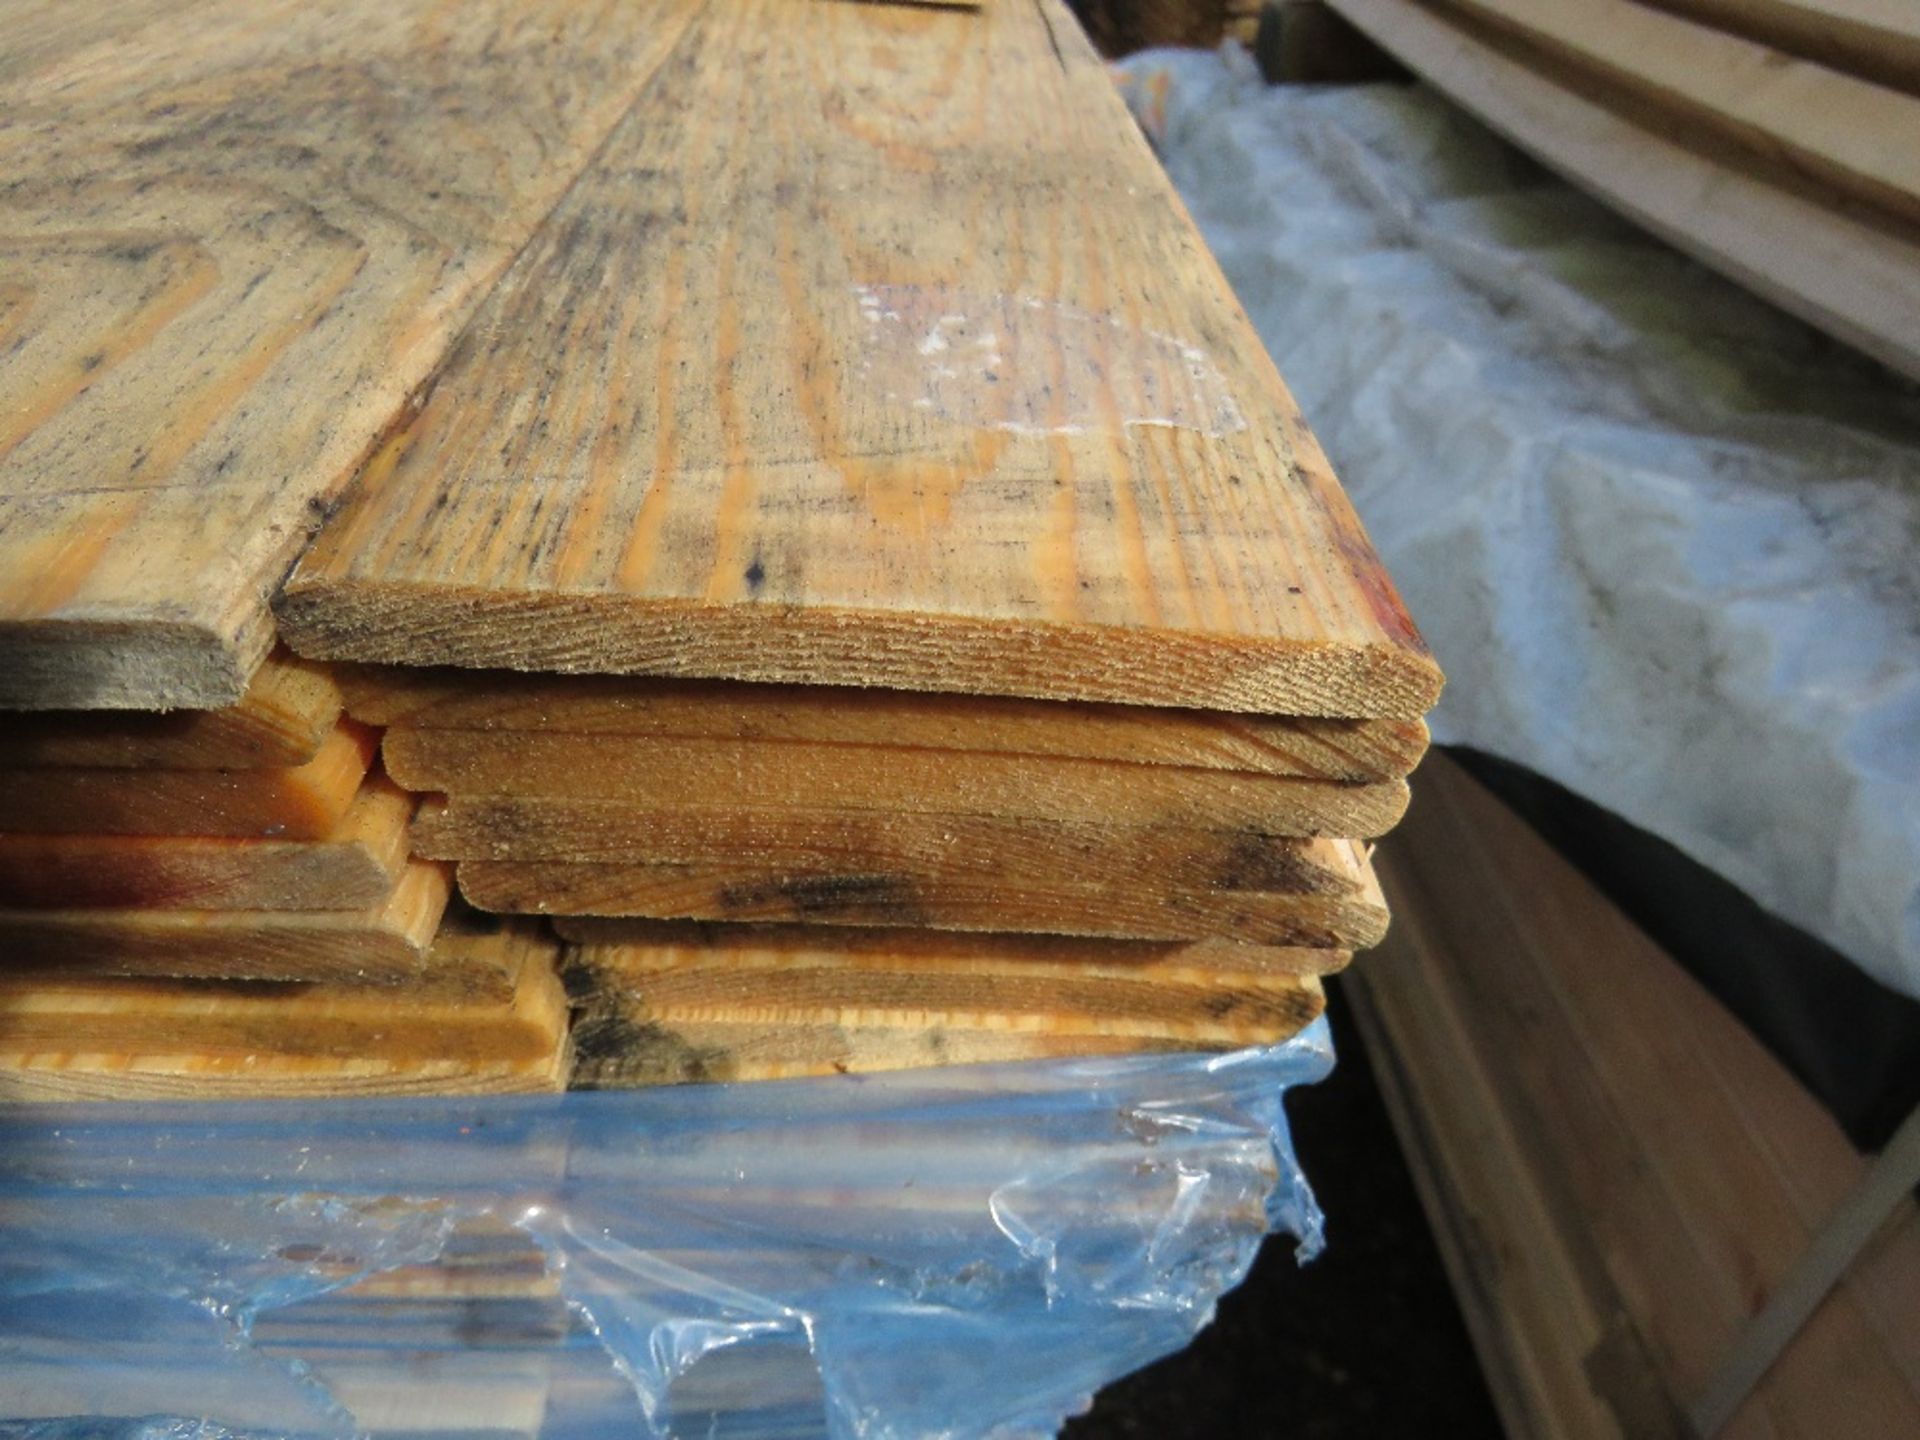 PACK OF UNTREATED THIN CLADDING TIMBER 1.75M X 9.5CM WIDTH APPROX. - Image 2 of 3